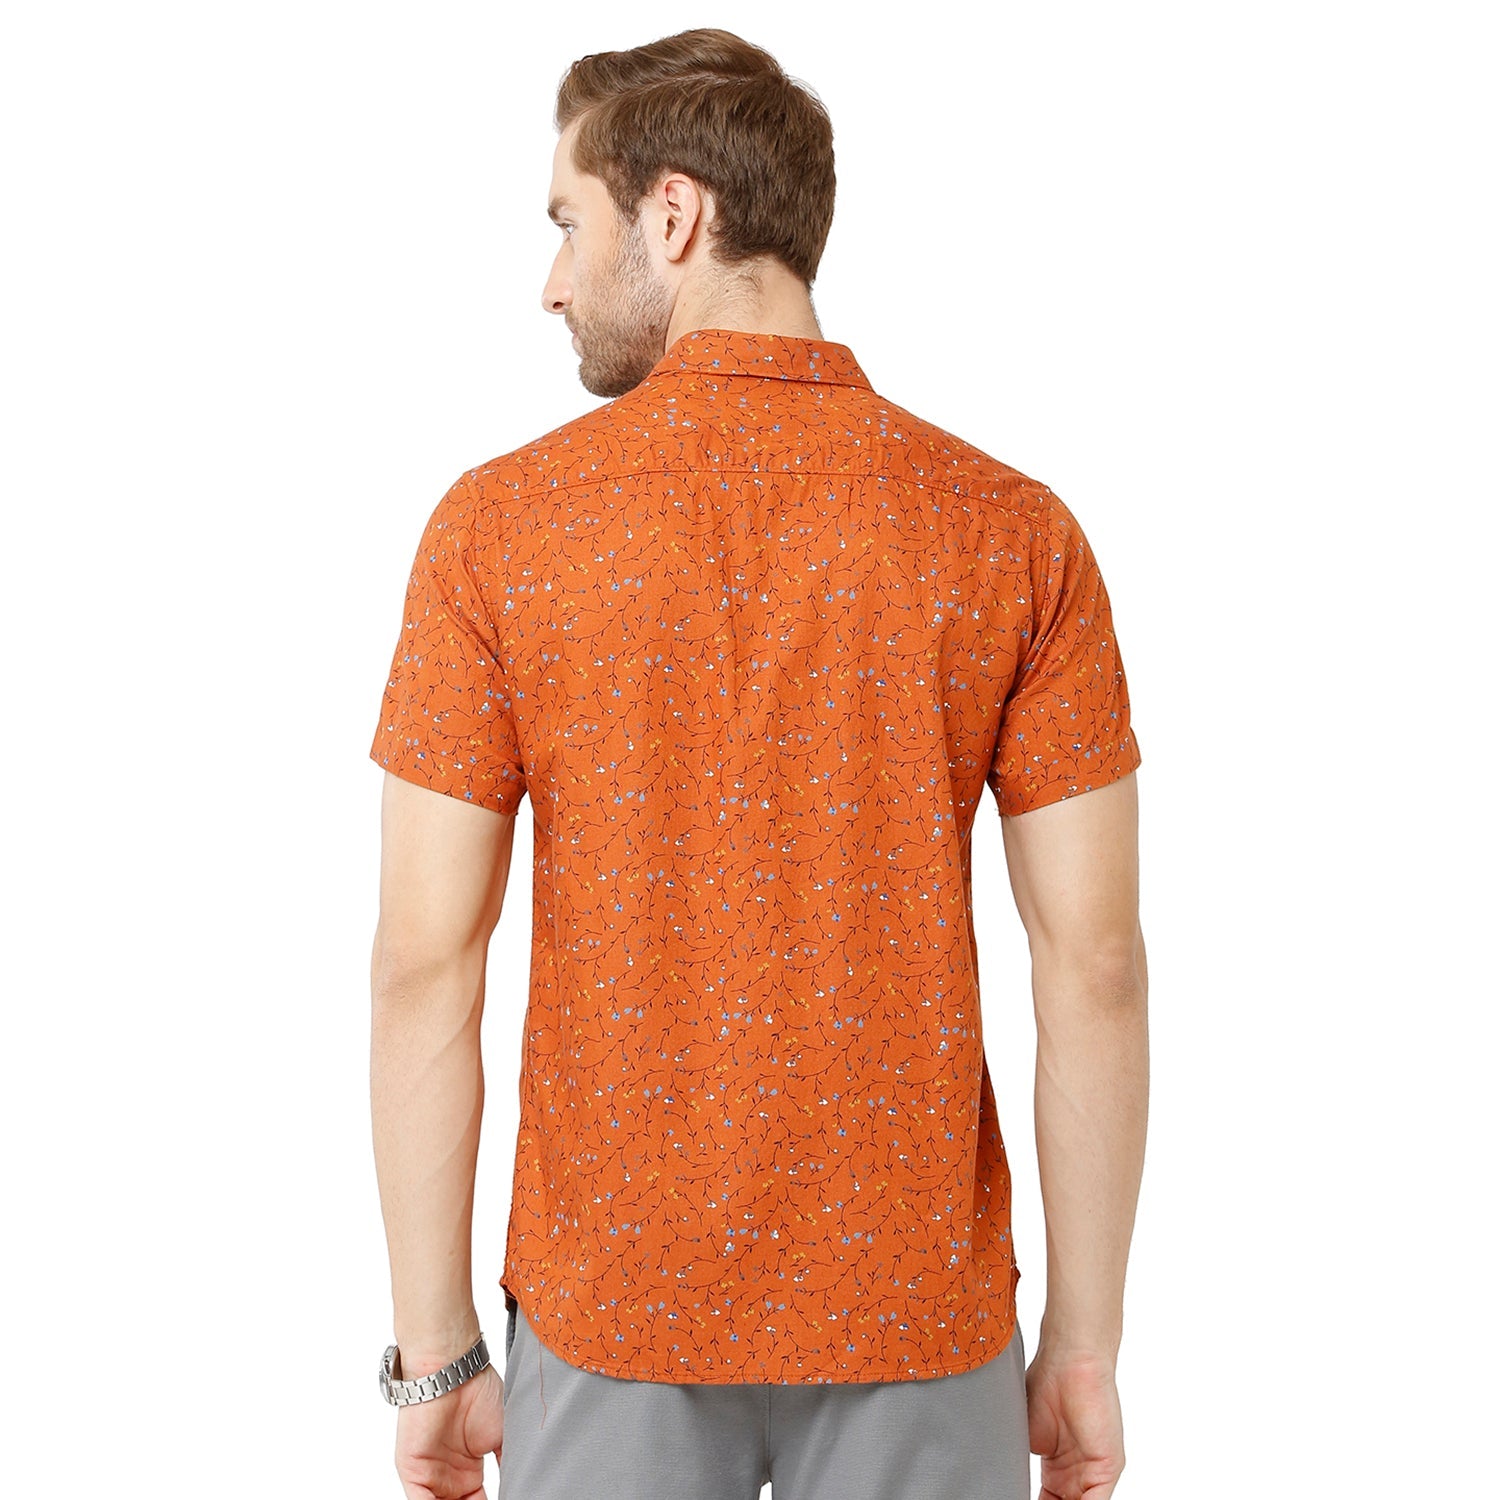 Classic Polo Mens 100% Cotton Printed Slim Fit Orange Color Woven Shirt - SN1-120 A Shirts Classic Polo 